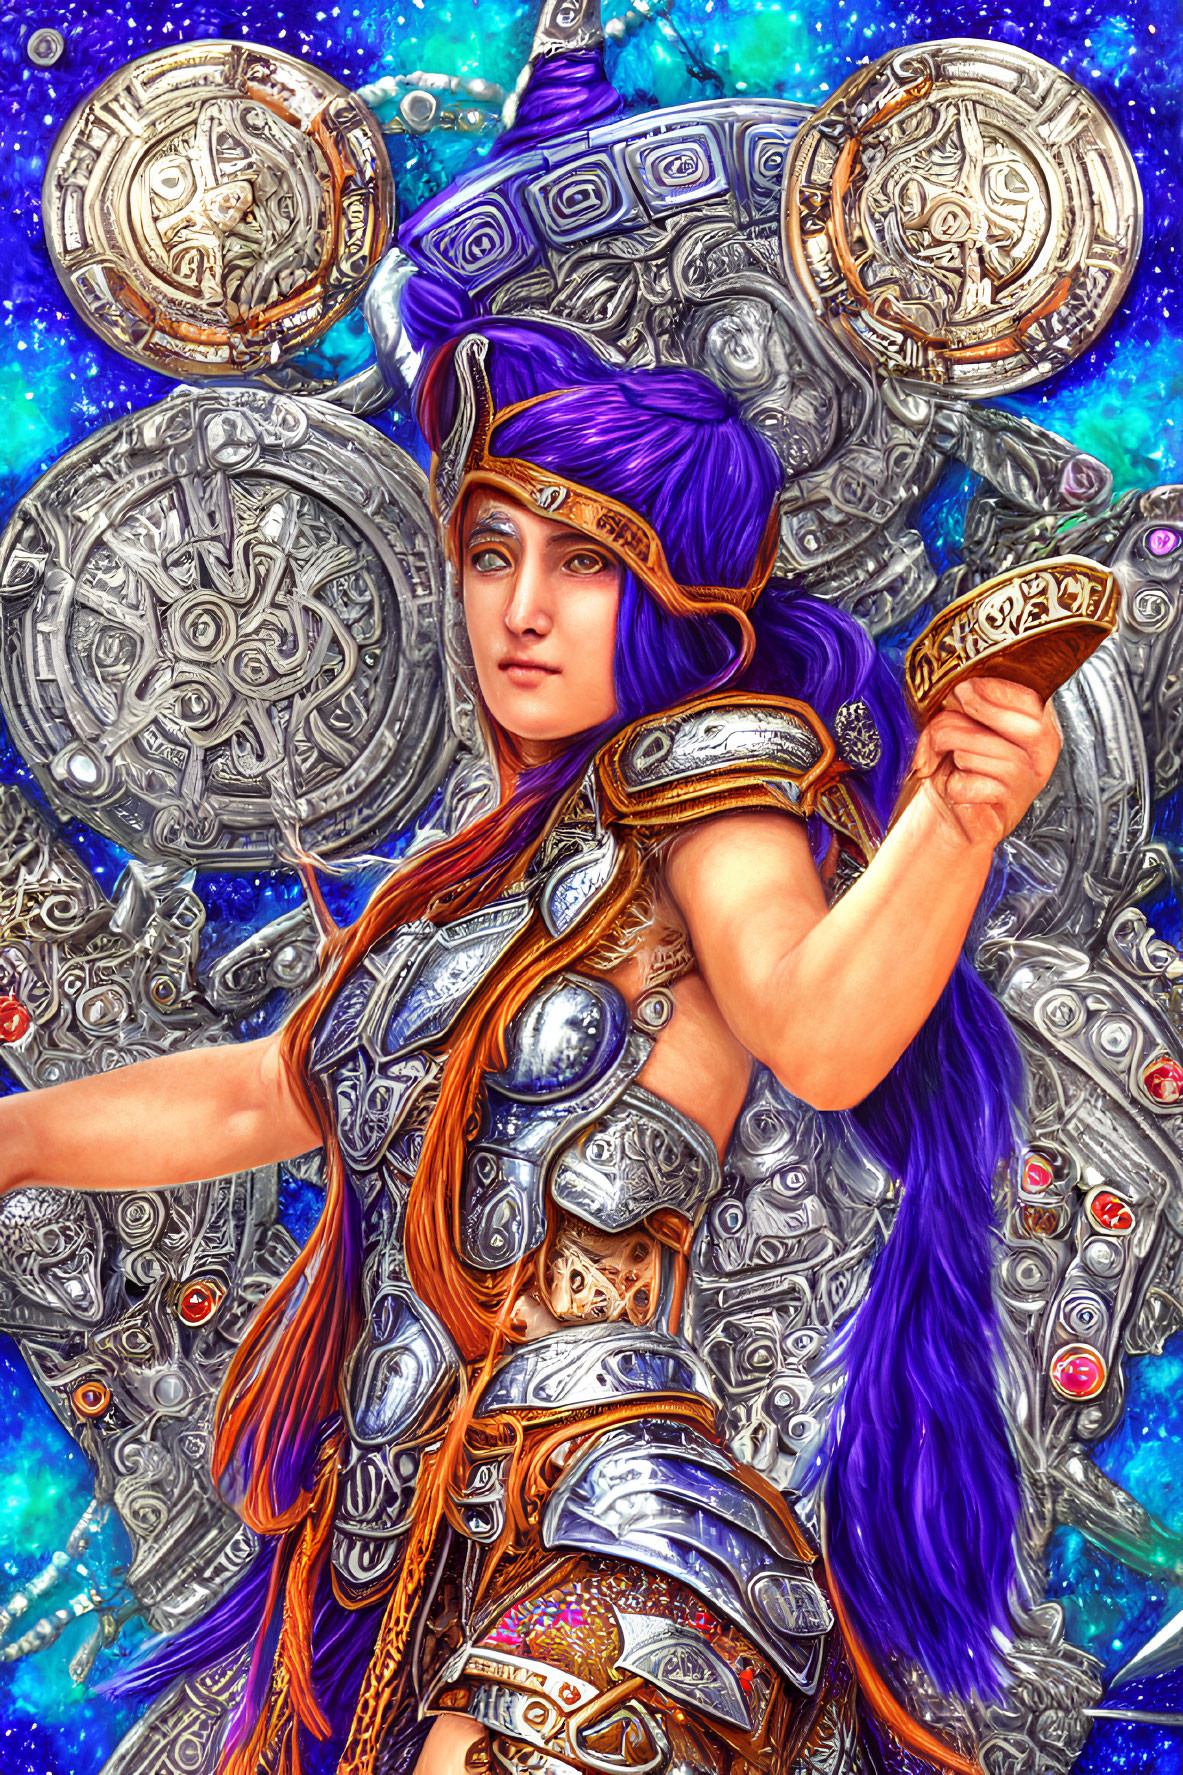 Colorful warrior with purple hair and silver armor holding a sword in ornate setting